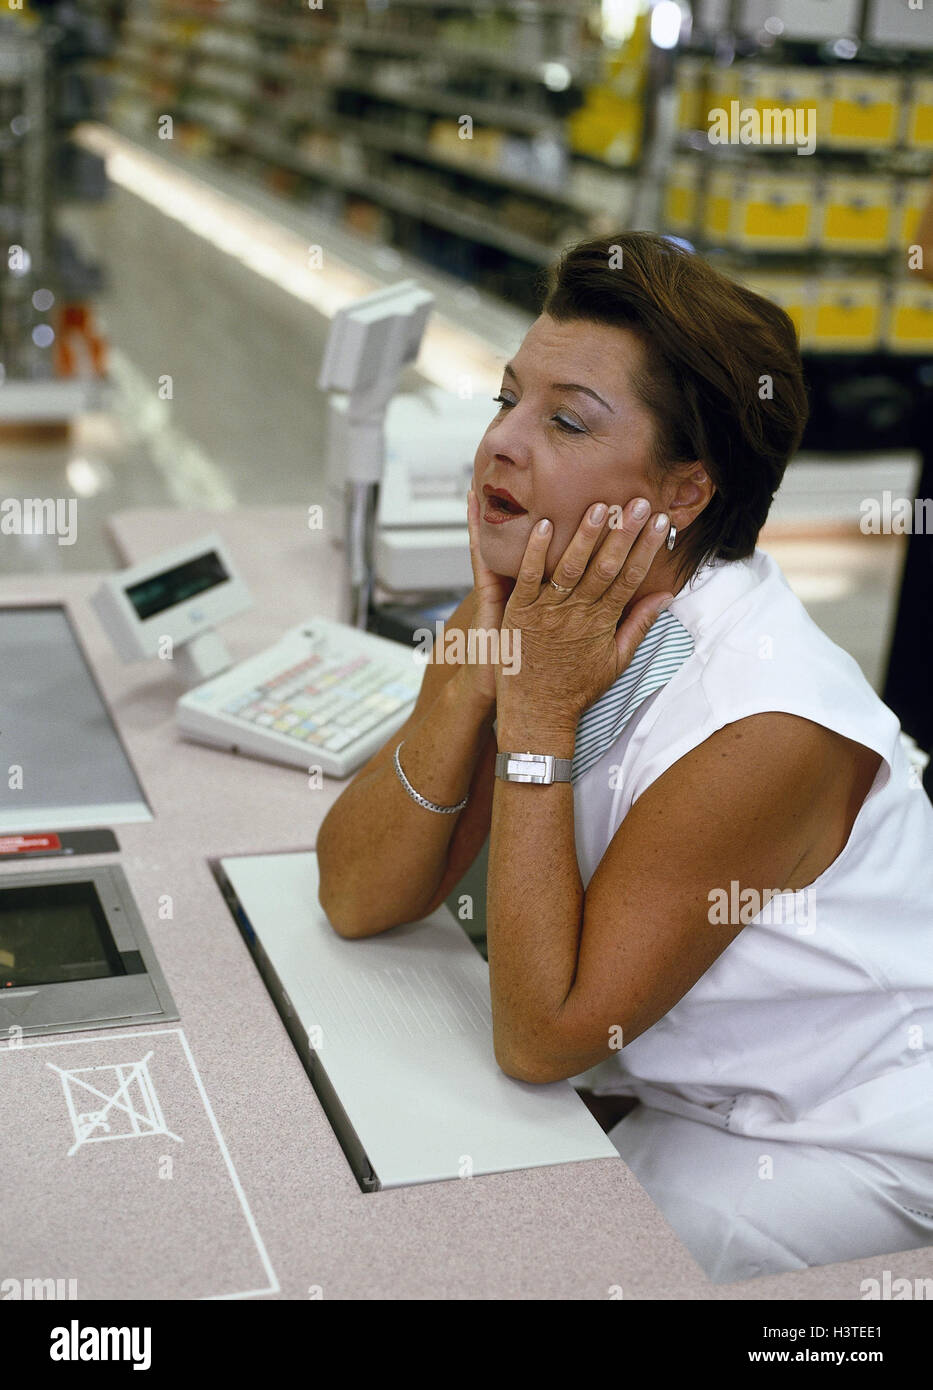 Supermarket, cashier, gesture, fatigue, depletion, business, retail trade, loading, cash box, consumption, pay, take the money, shopping, woman, occupation, shop assistant, inattentively, absently, reworks, tiredly, exhausted, disinterest, listlessness, b Stock Photo